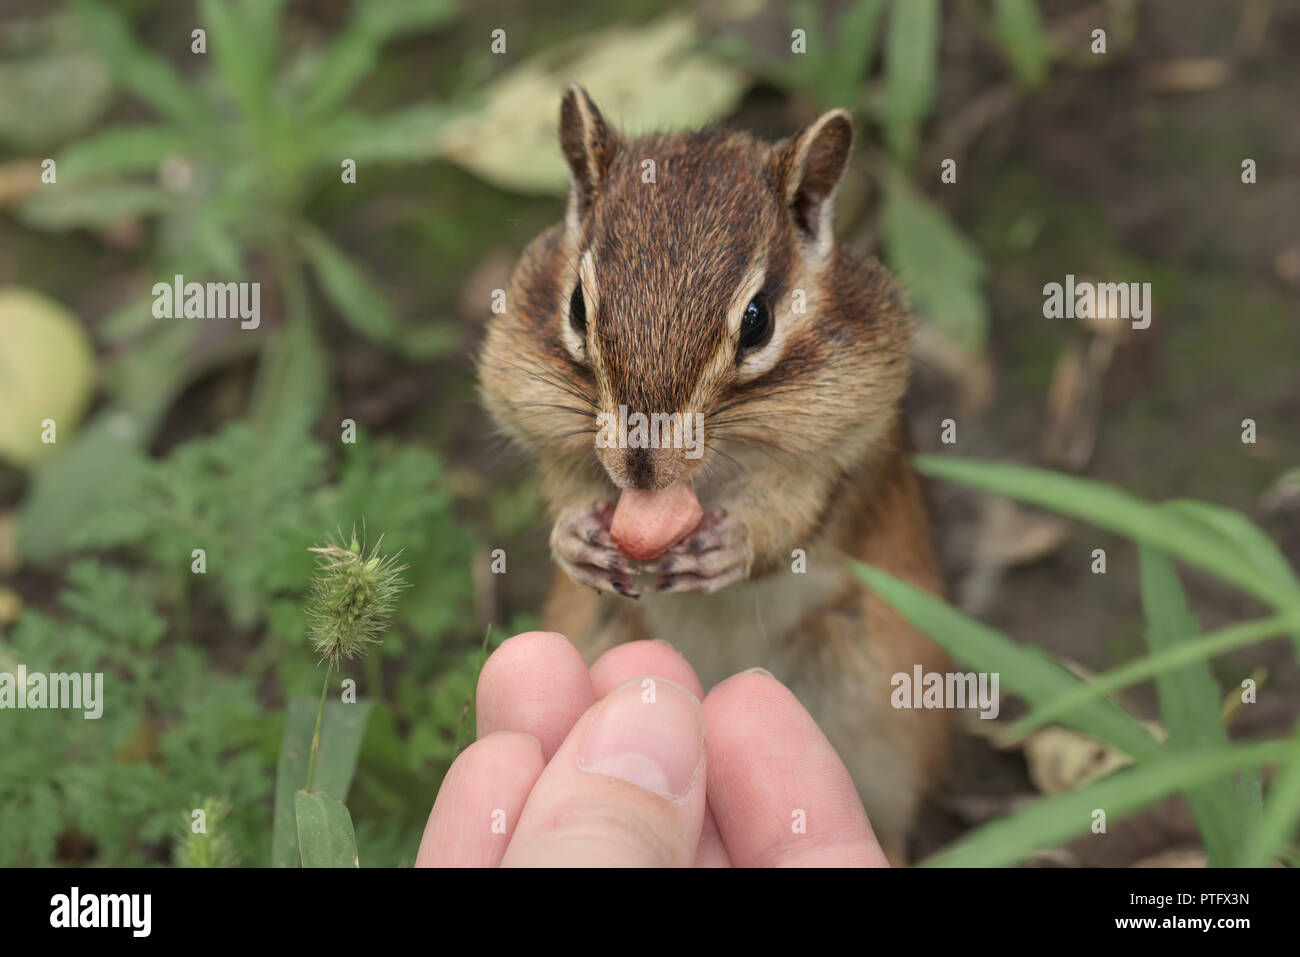 in nature. Chipmunk is stuffing food mouth Photo - Alamy